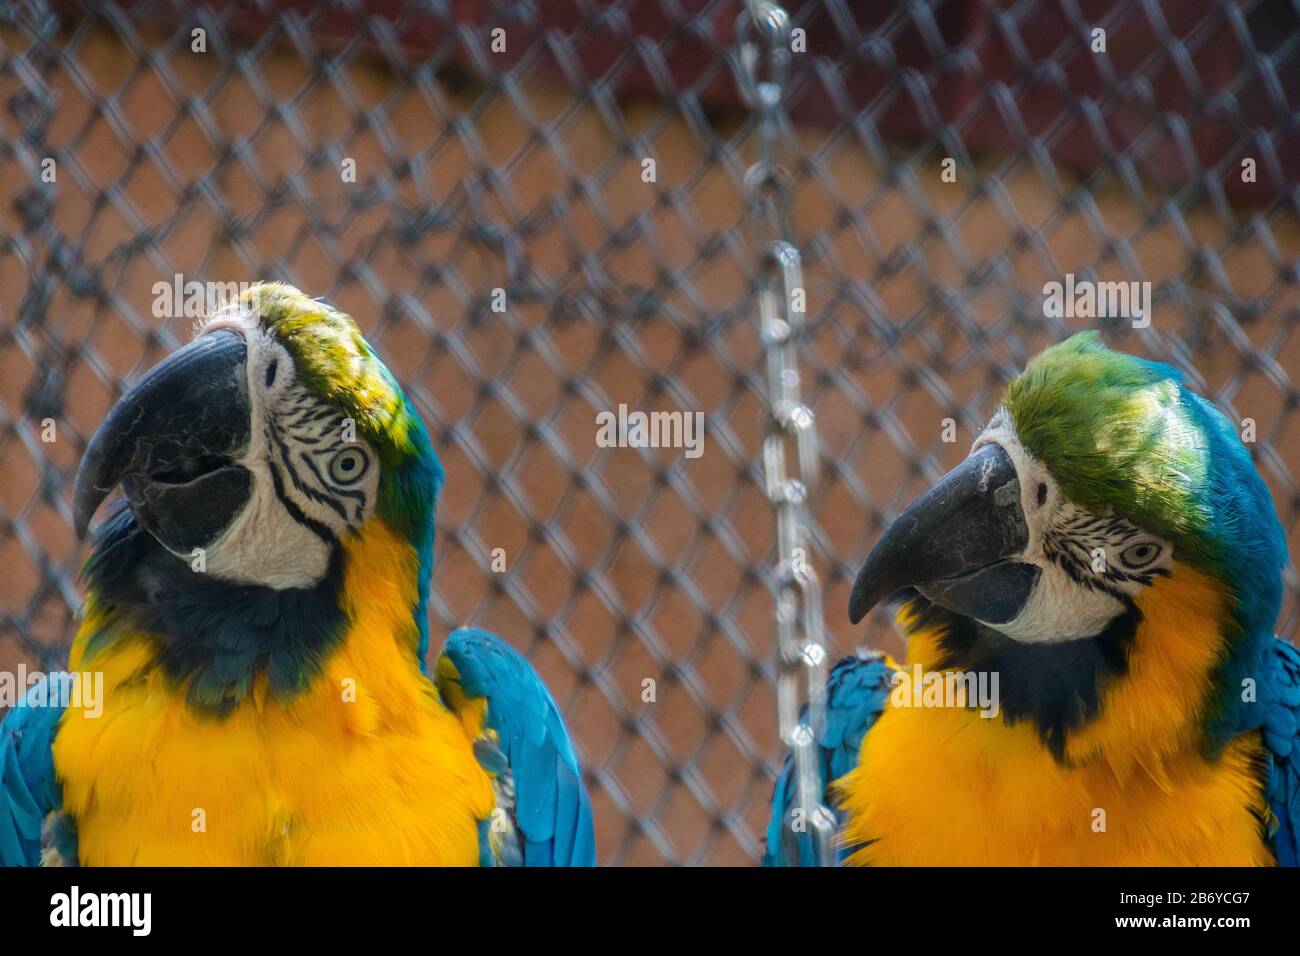 Ara Parrots High Resolution Stock Photography and Images - Alamy